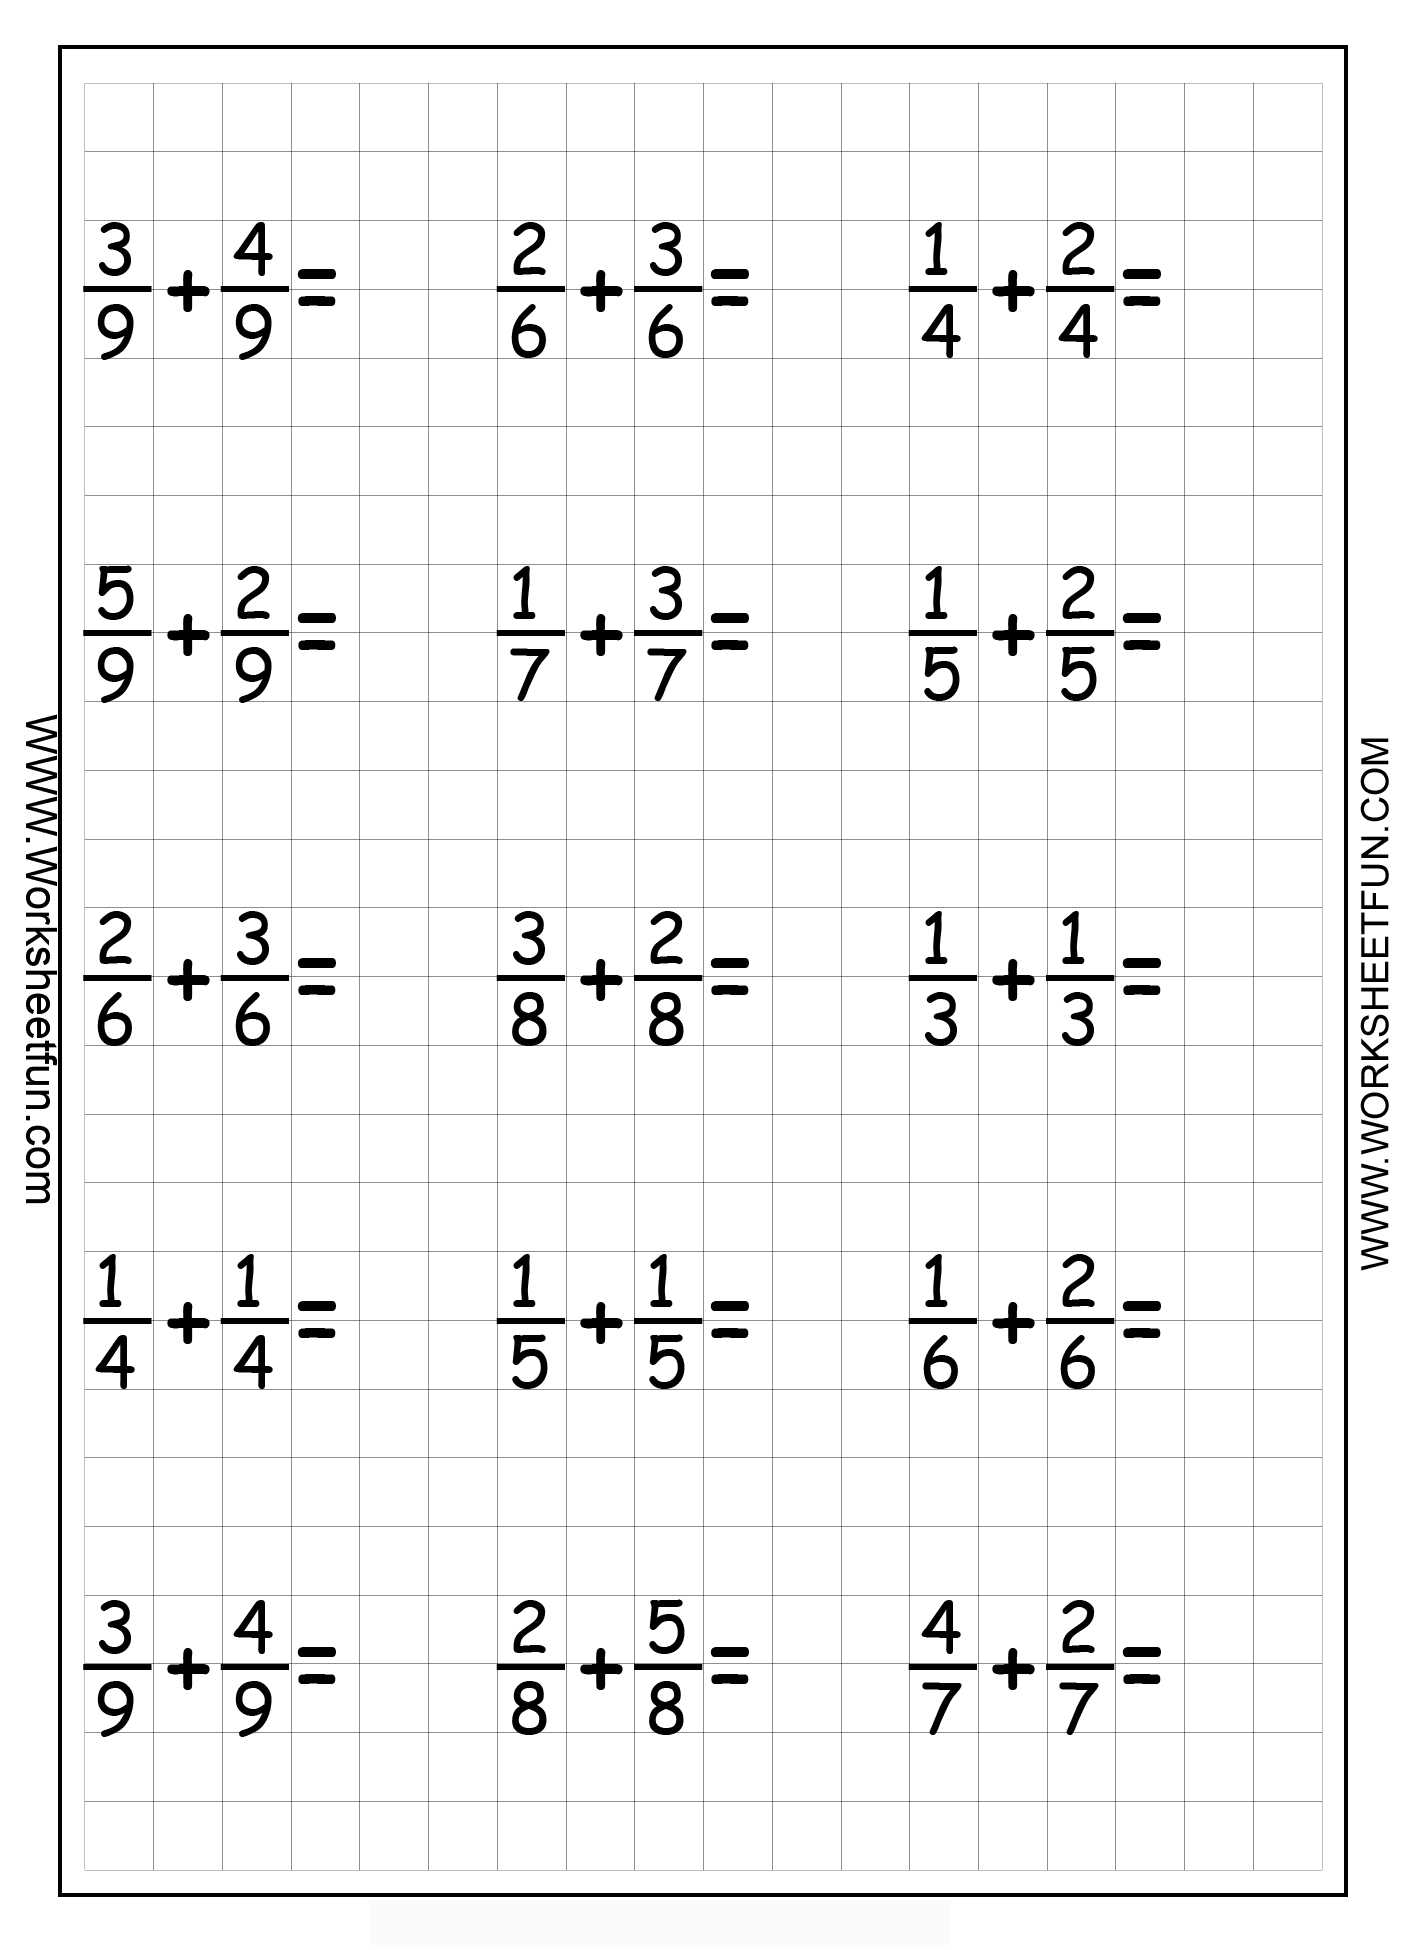 Reducing Fractions to Lowest Terms Worksheets Also Multiplying Fractions with Cross Canceling Mon Core Sheets and